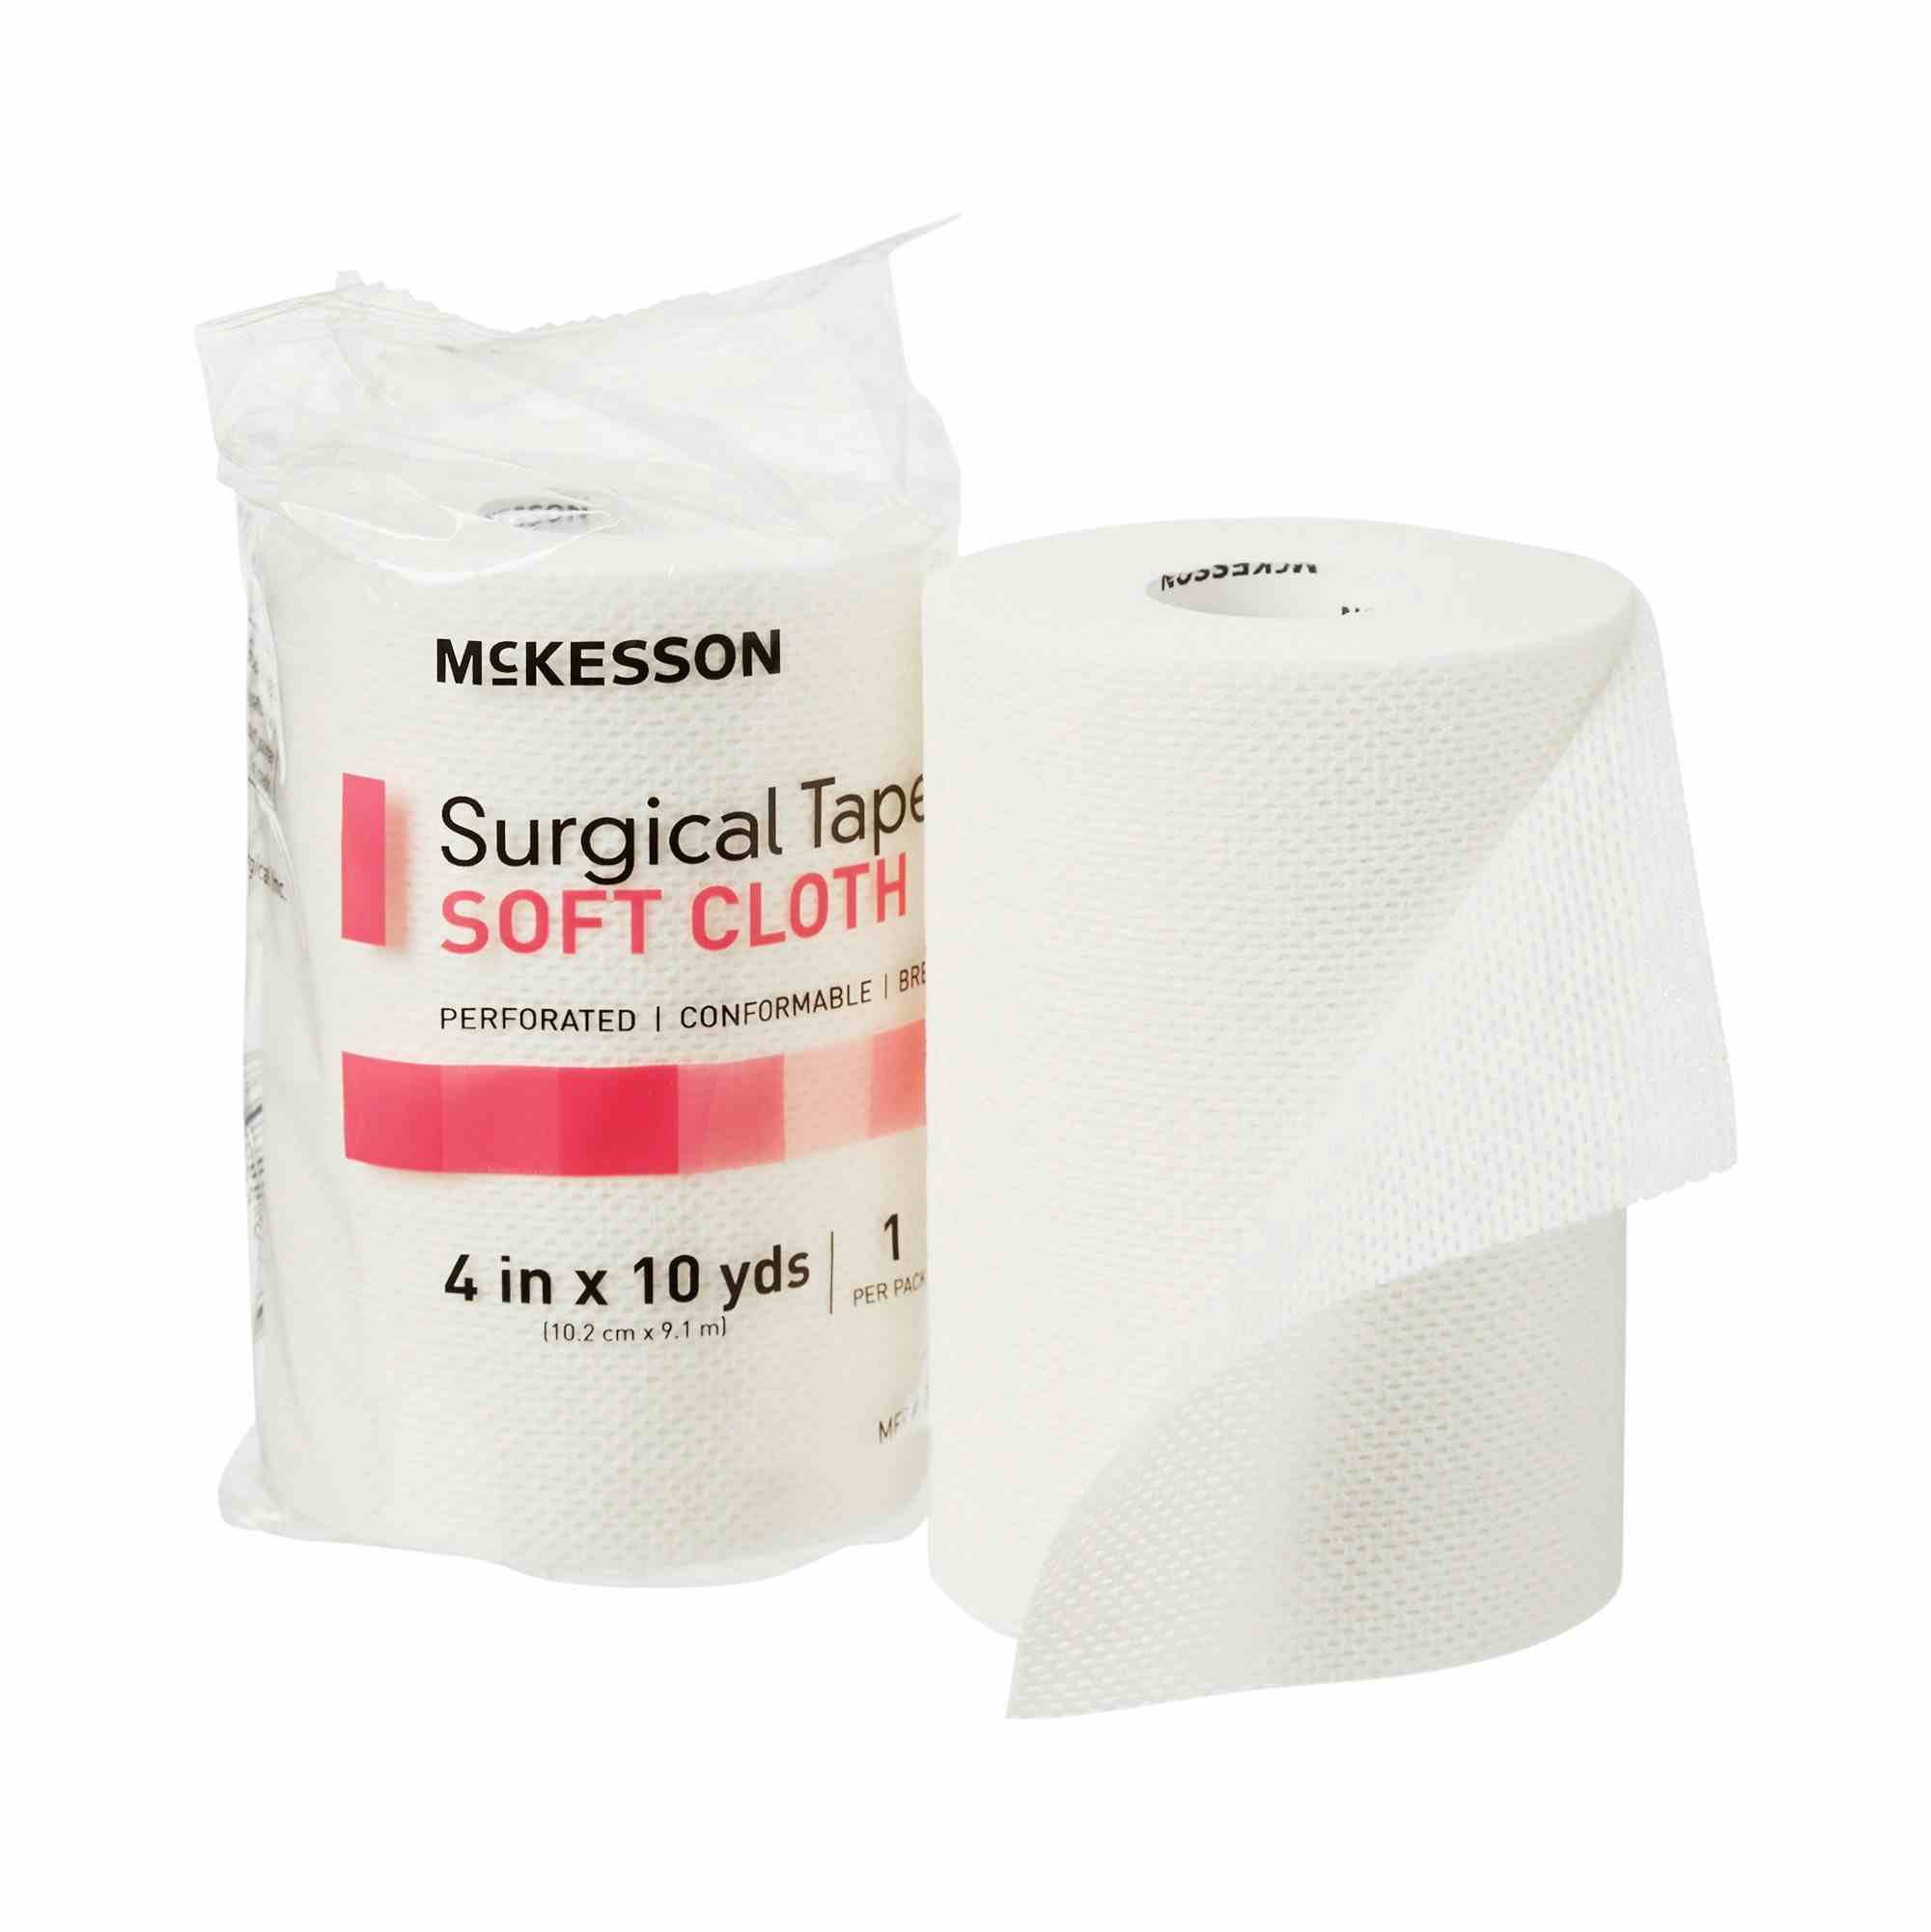 McKesson Cloth Medical Tape, 4 Inch x 10 Yard, White, 172-49240, Pack of 1